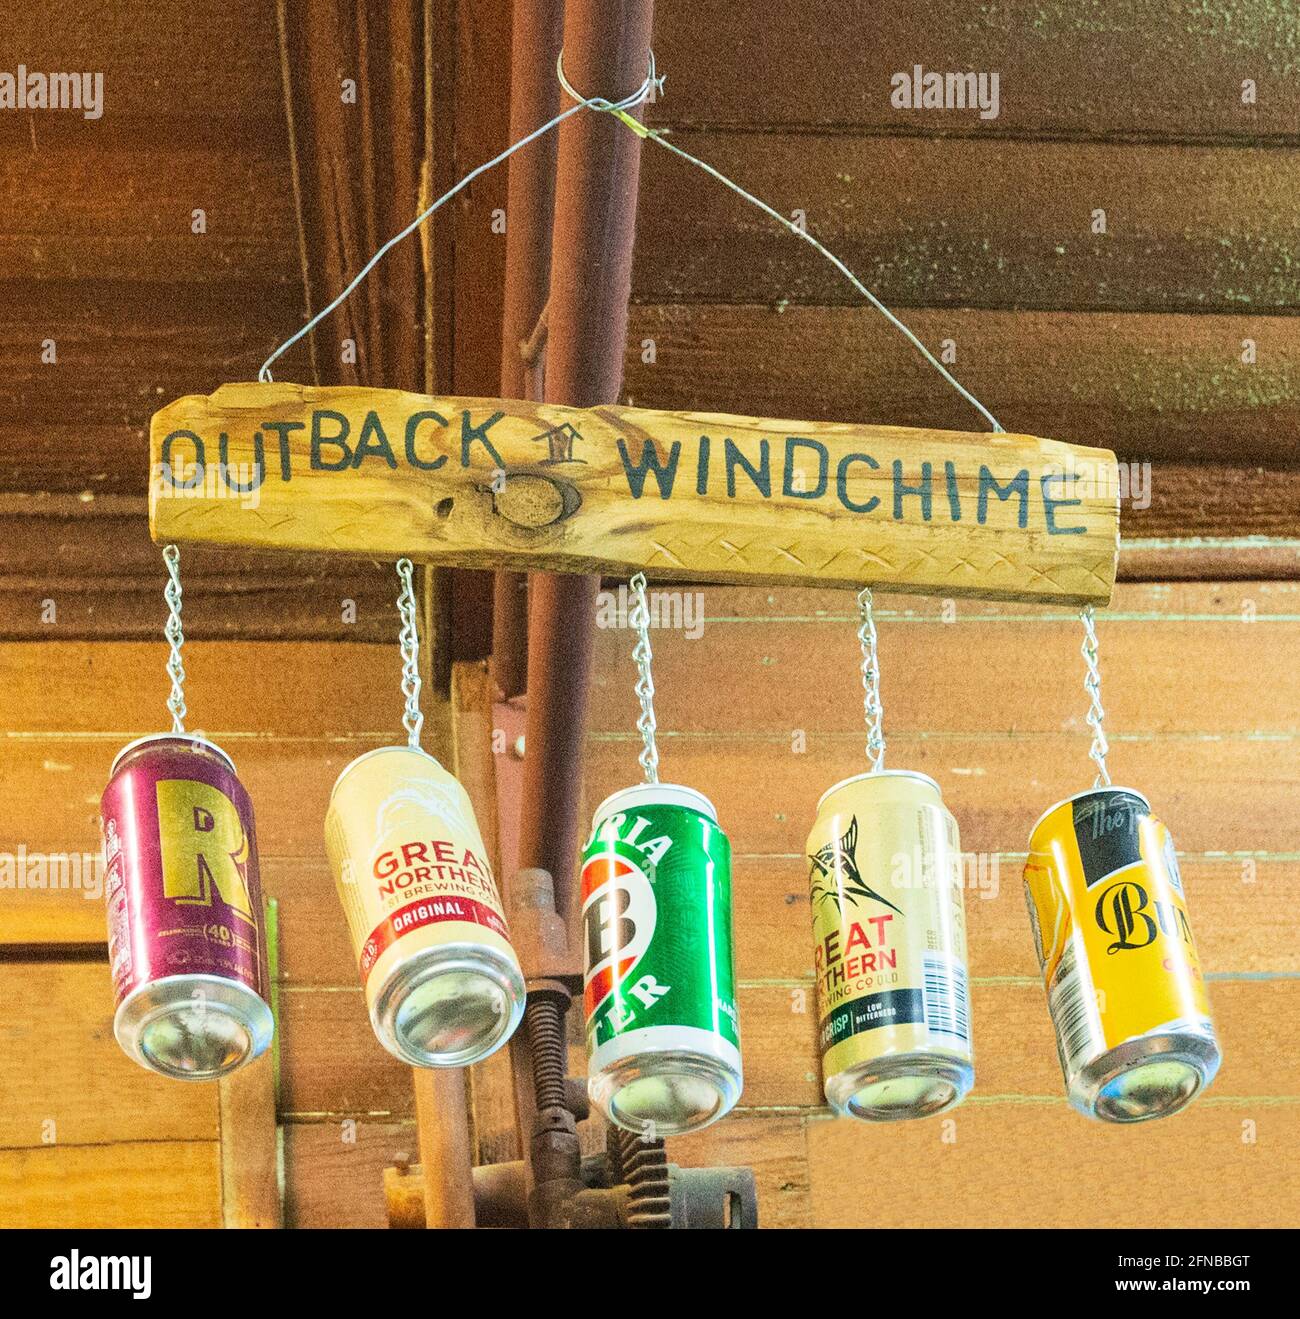 Amusing Outback windchime made of beer cans inside the Walkabout Creek Hotel featured in the Crocodile Dundee's movie, Central Queensland, QLD, Austra Stock Photo